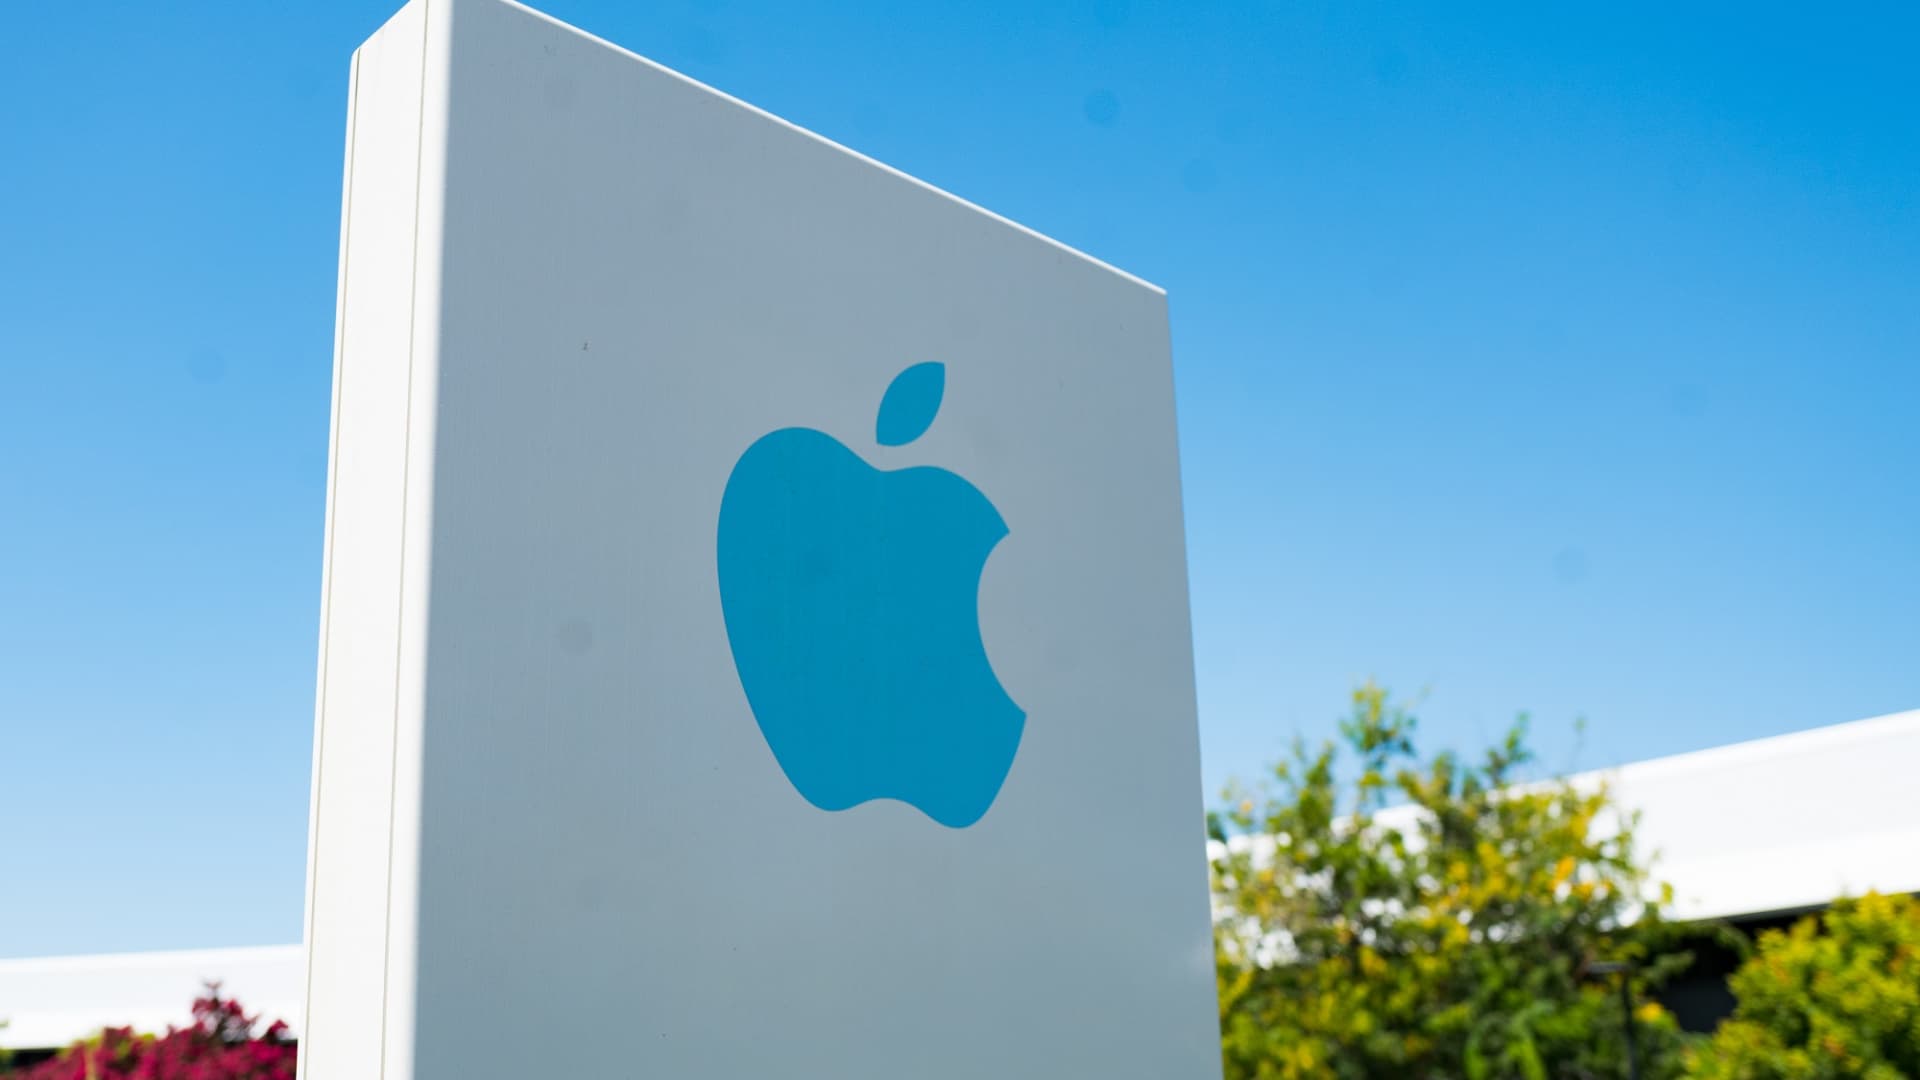 Close-up of blue logo on sign with facade of headquarters buildings in background near the headquarters of Apple Computers in the Silicon Valley, Cupertino, California, August 26, 2018.